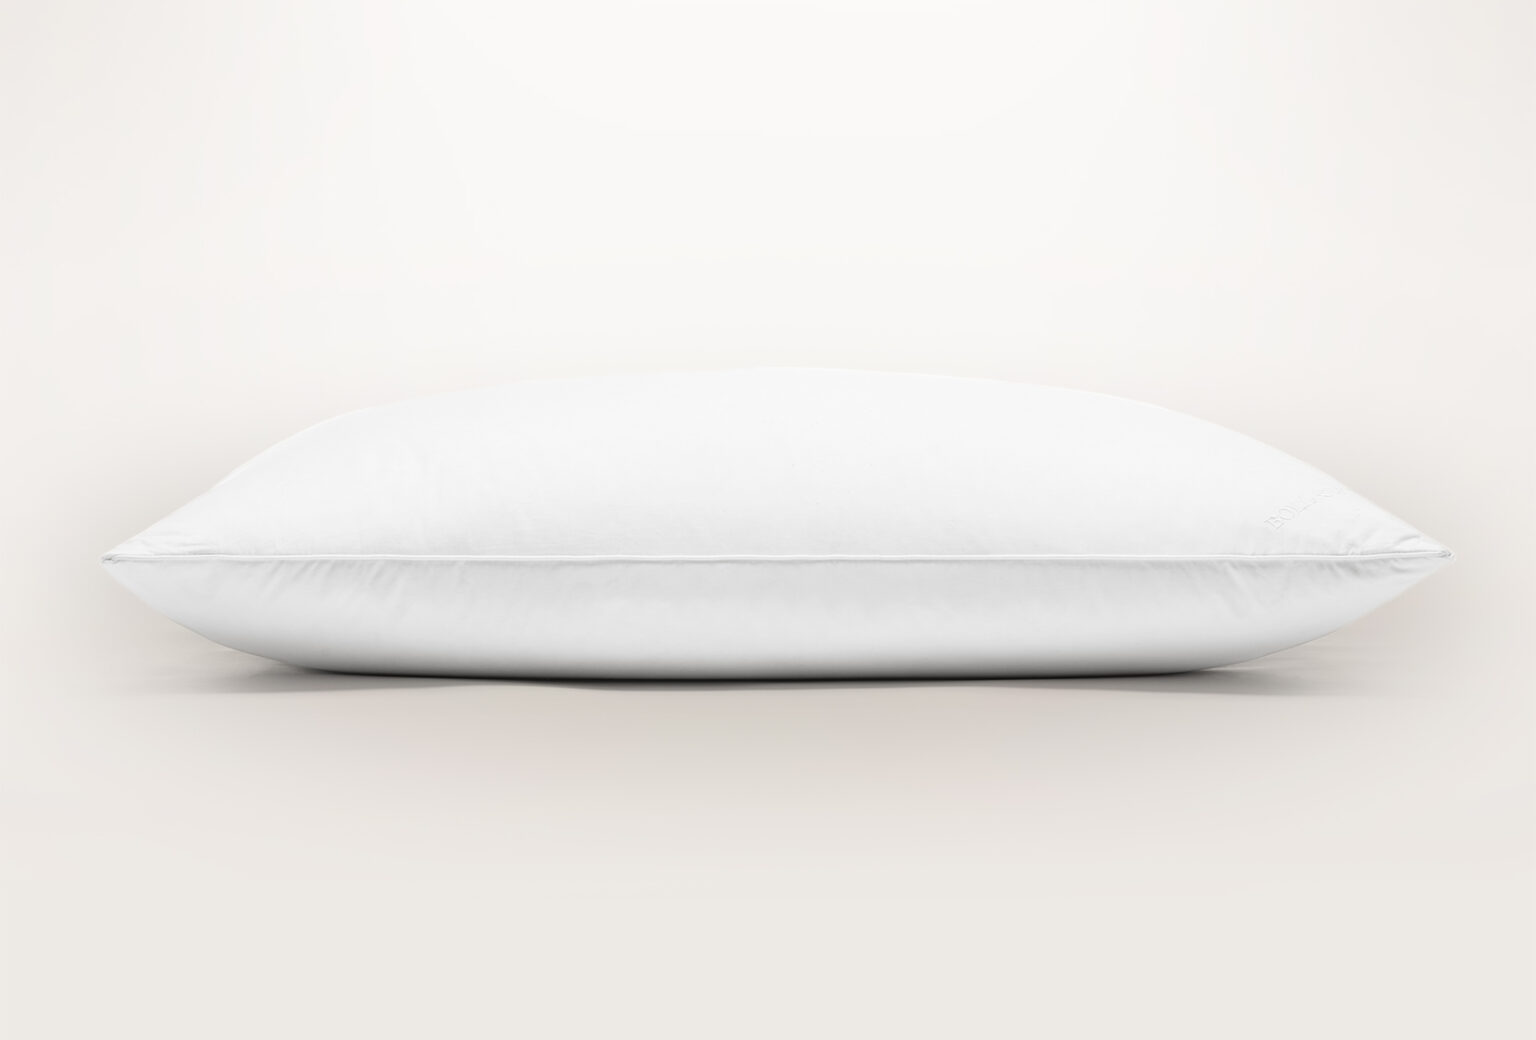 product image of the Boll & Branch Down Alternative Pillow